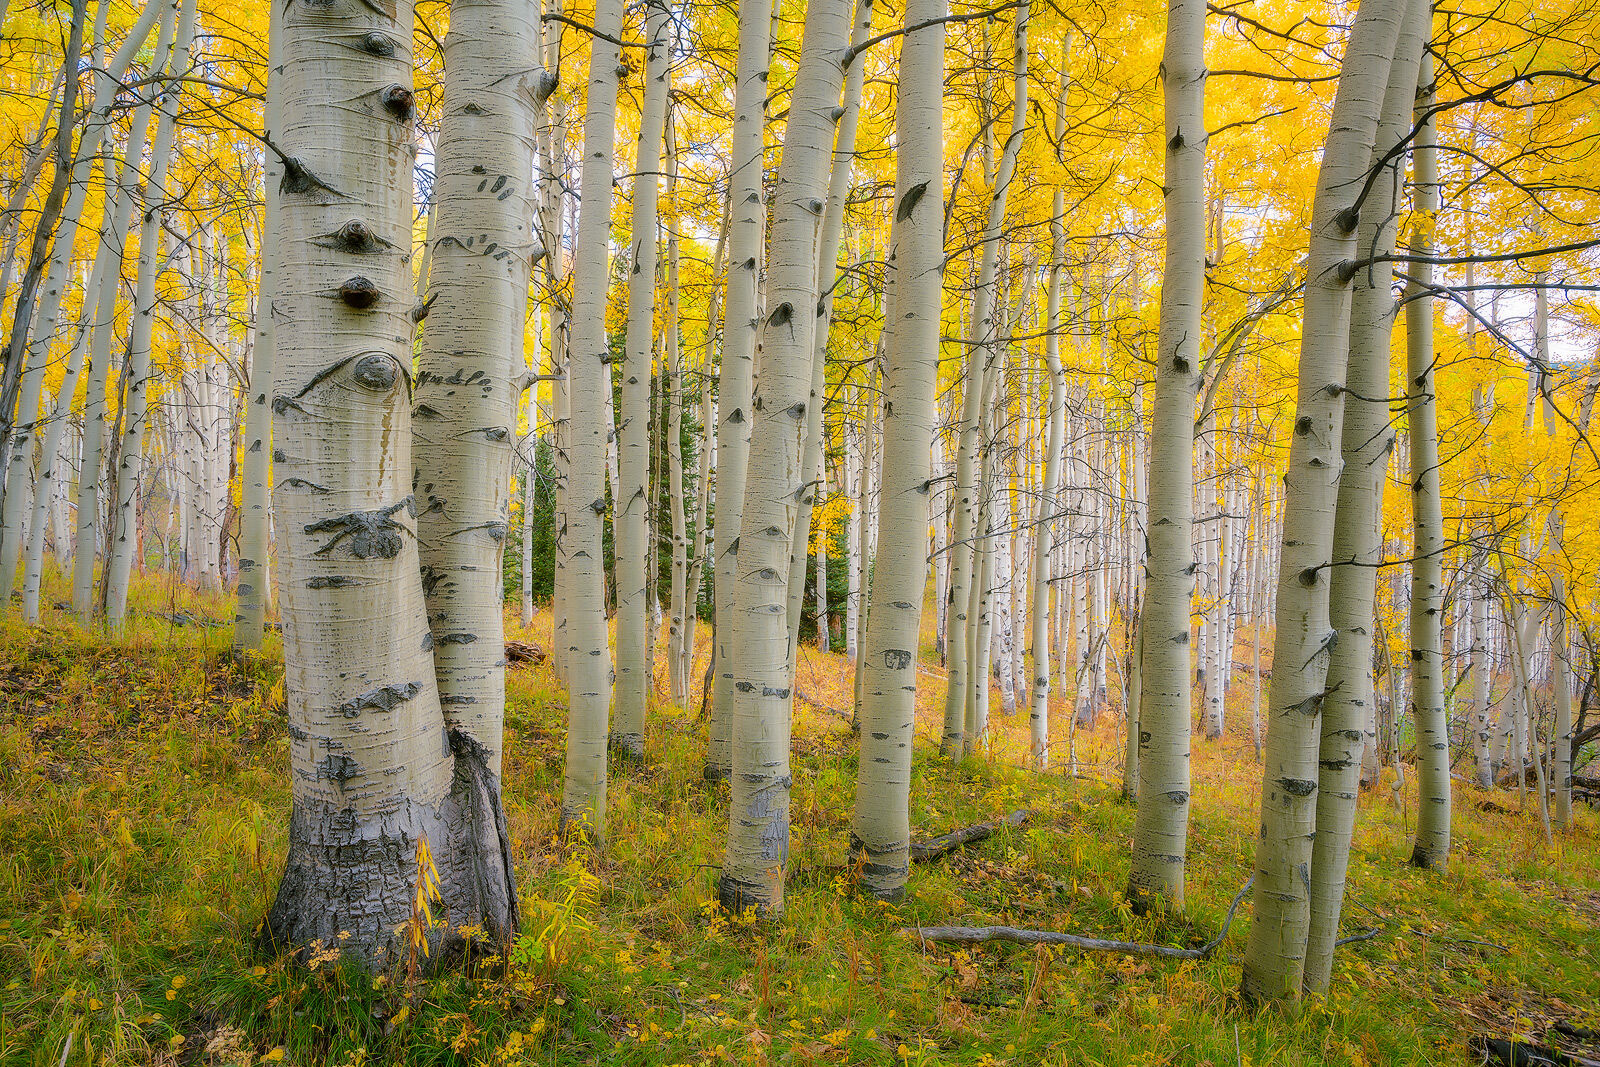 Aspen tree trunks with bear claw scars are seen up close with yellow aspen leaves on trees in the background.